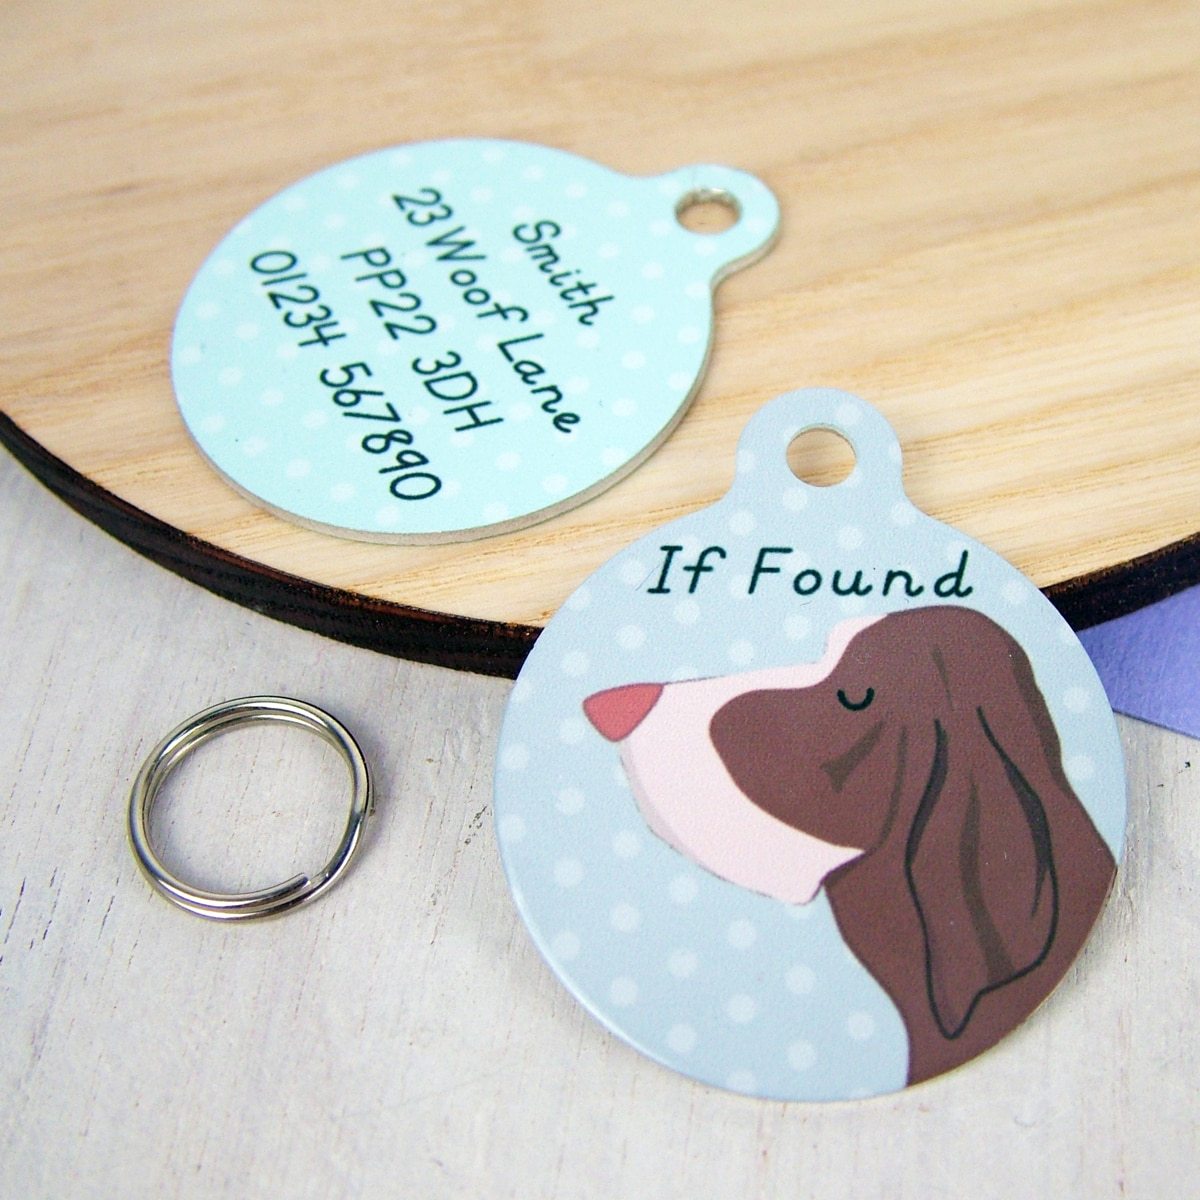 personalised dog tags